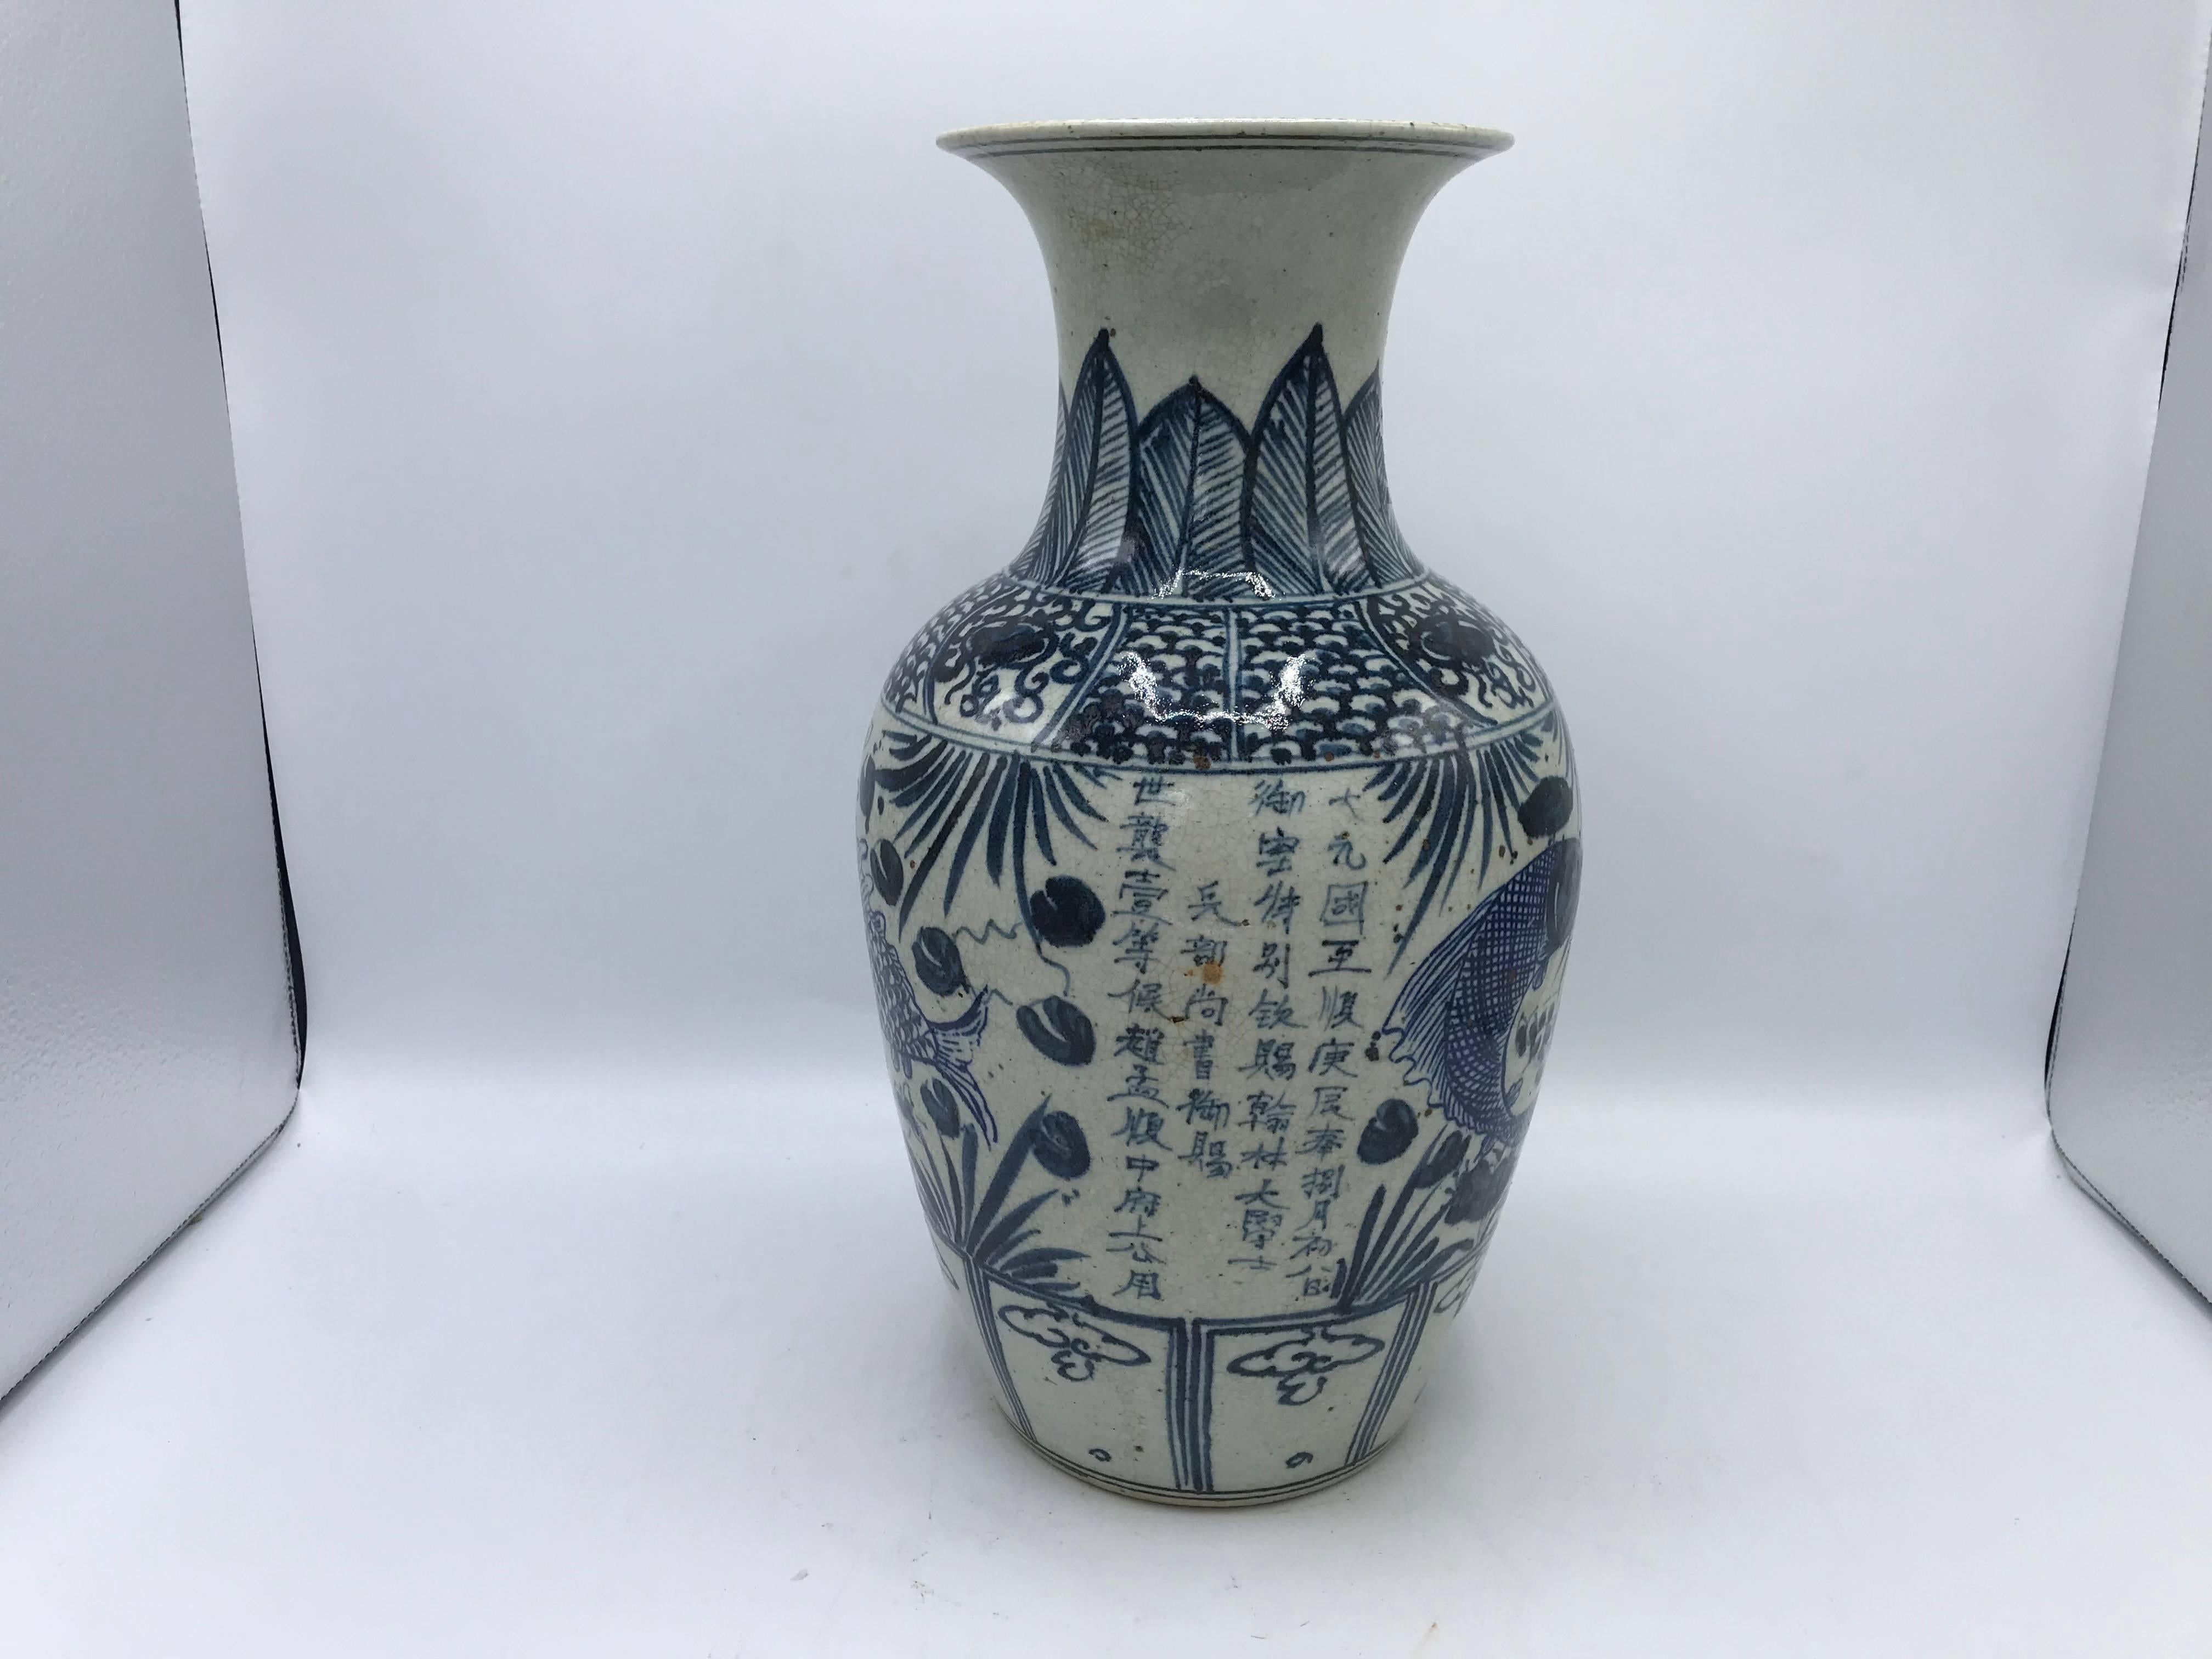 Pottery Blue and White Vase with Fish Motif and Calligraphy